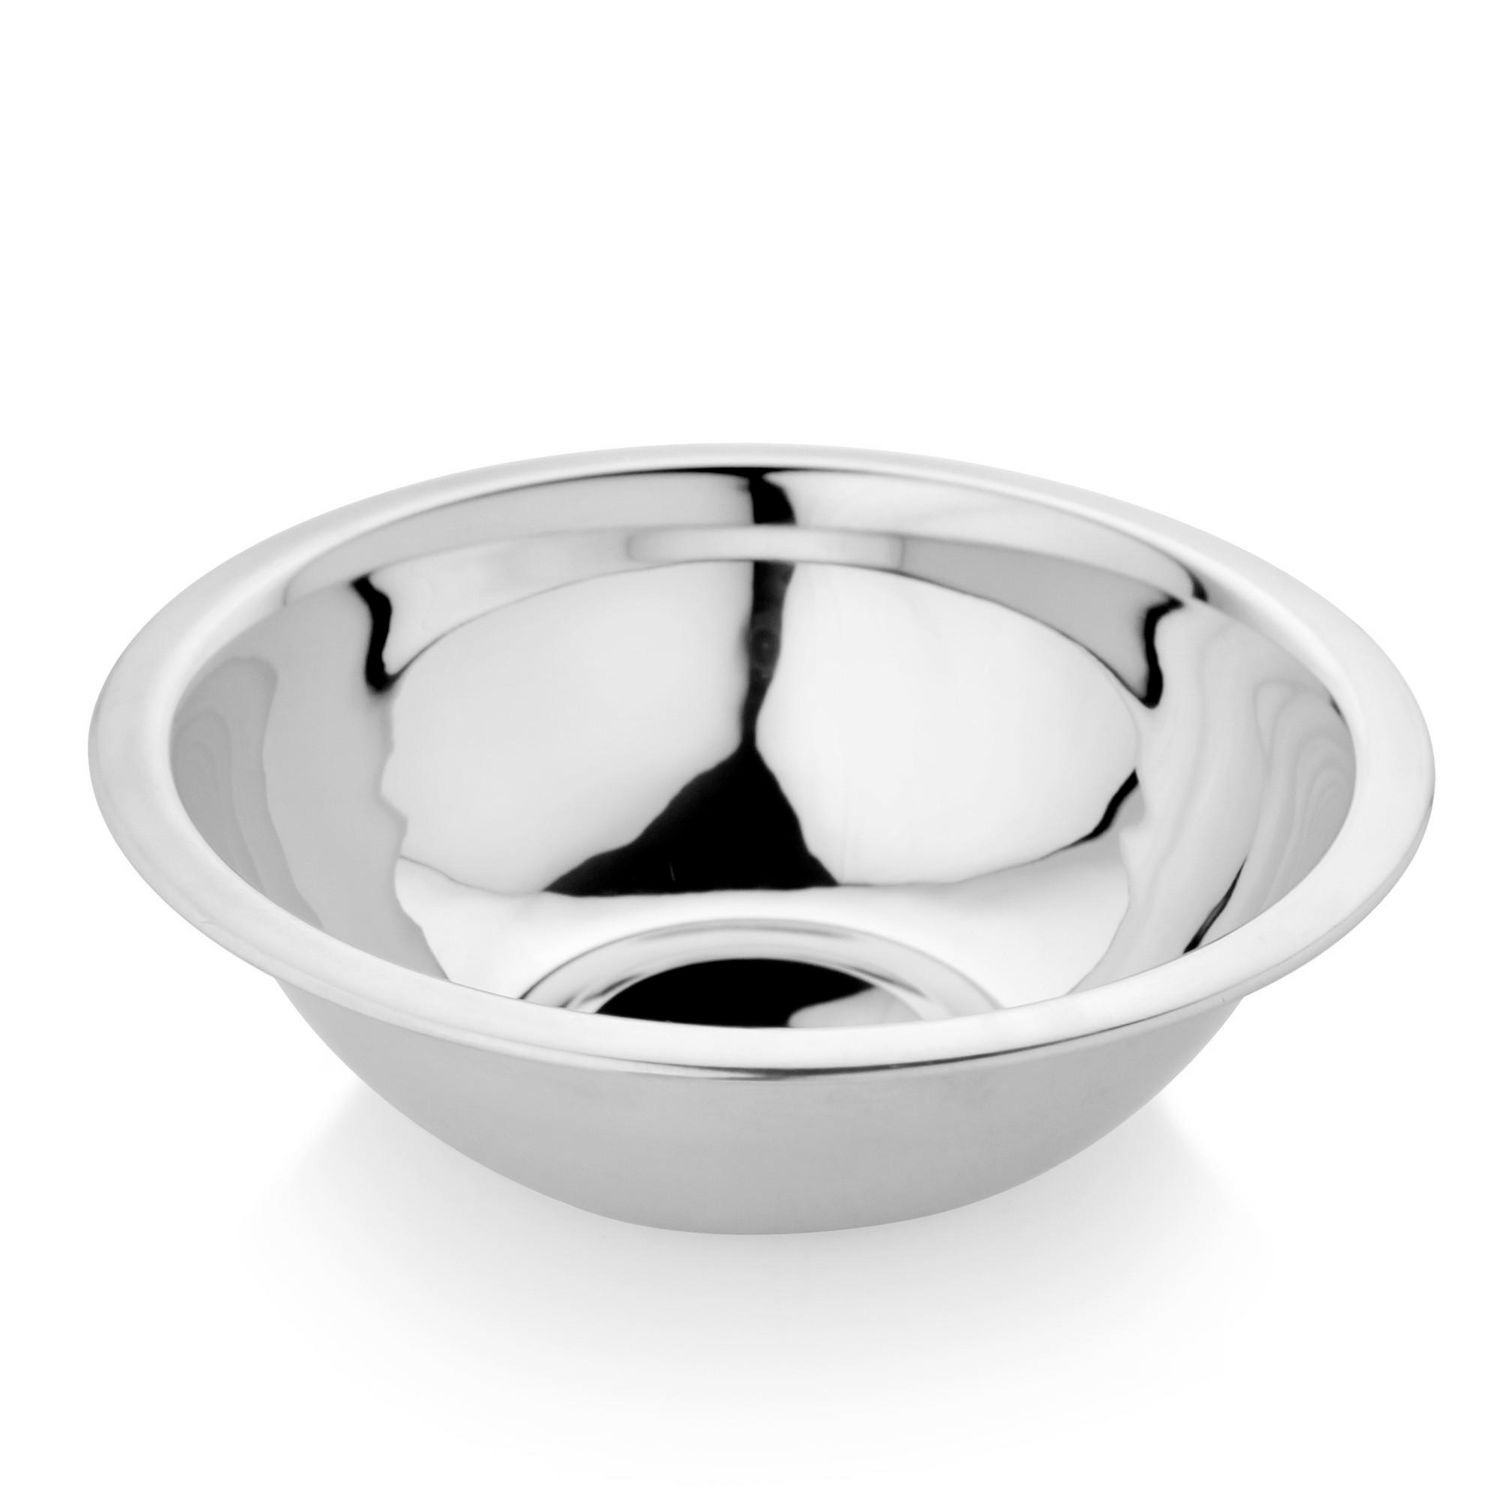 Mainstays Stainless Steel 8 Quart Shiny Matte Silver Mixing Bowl 